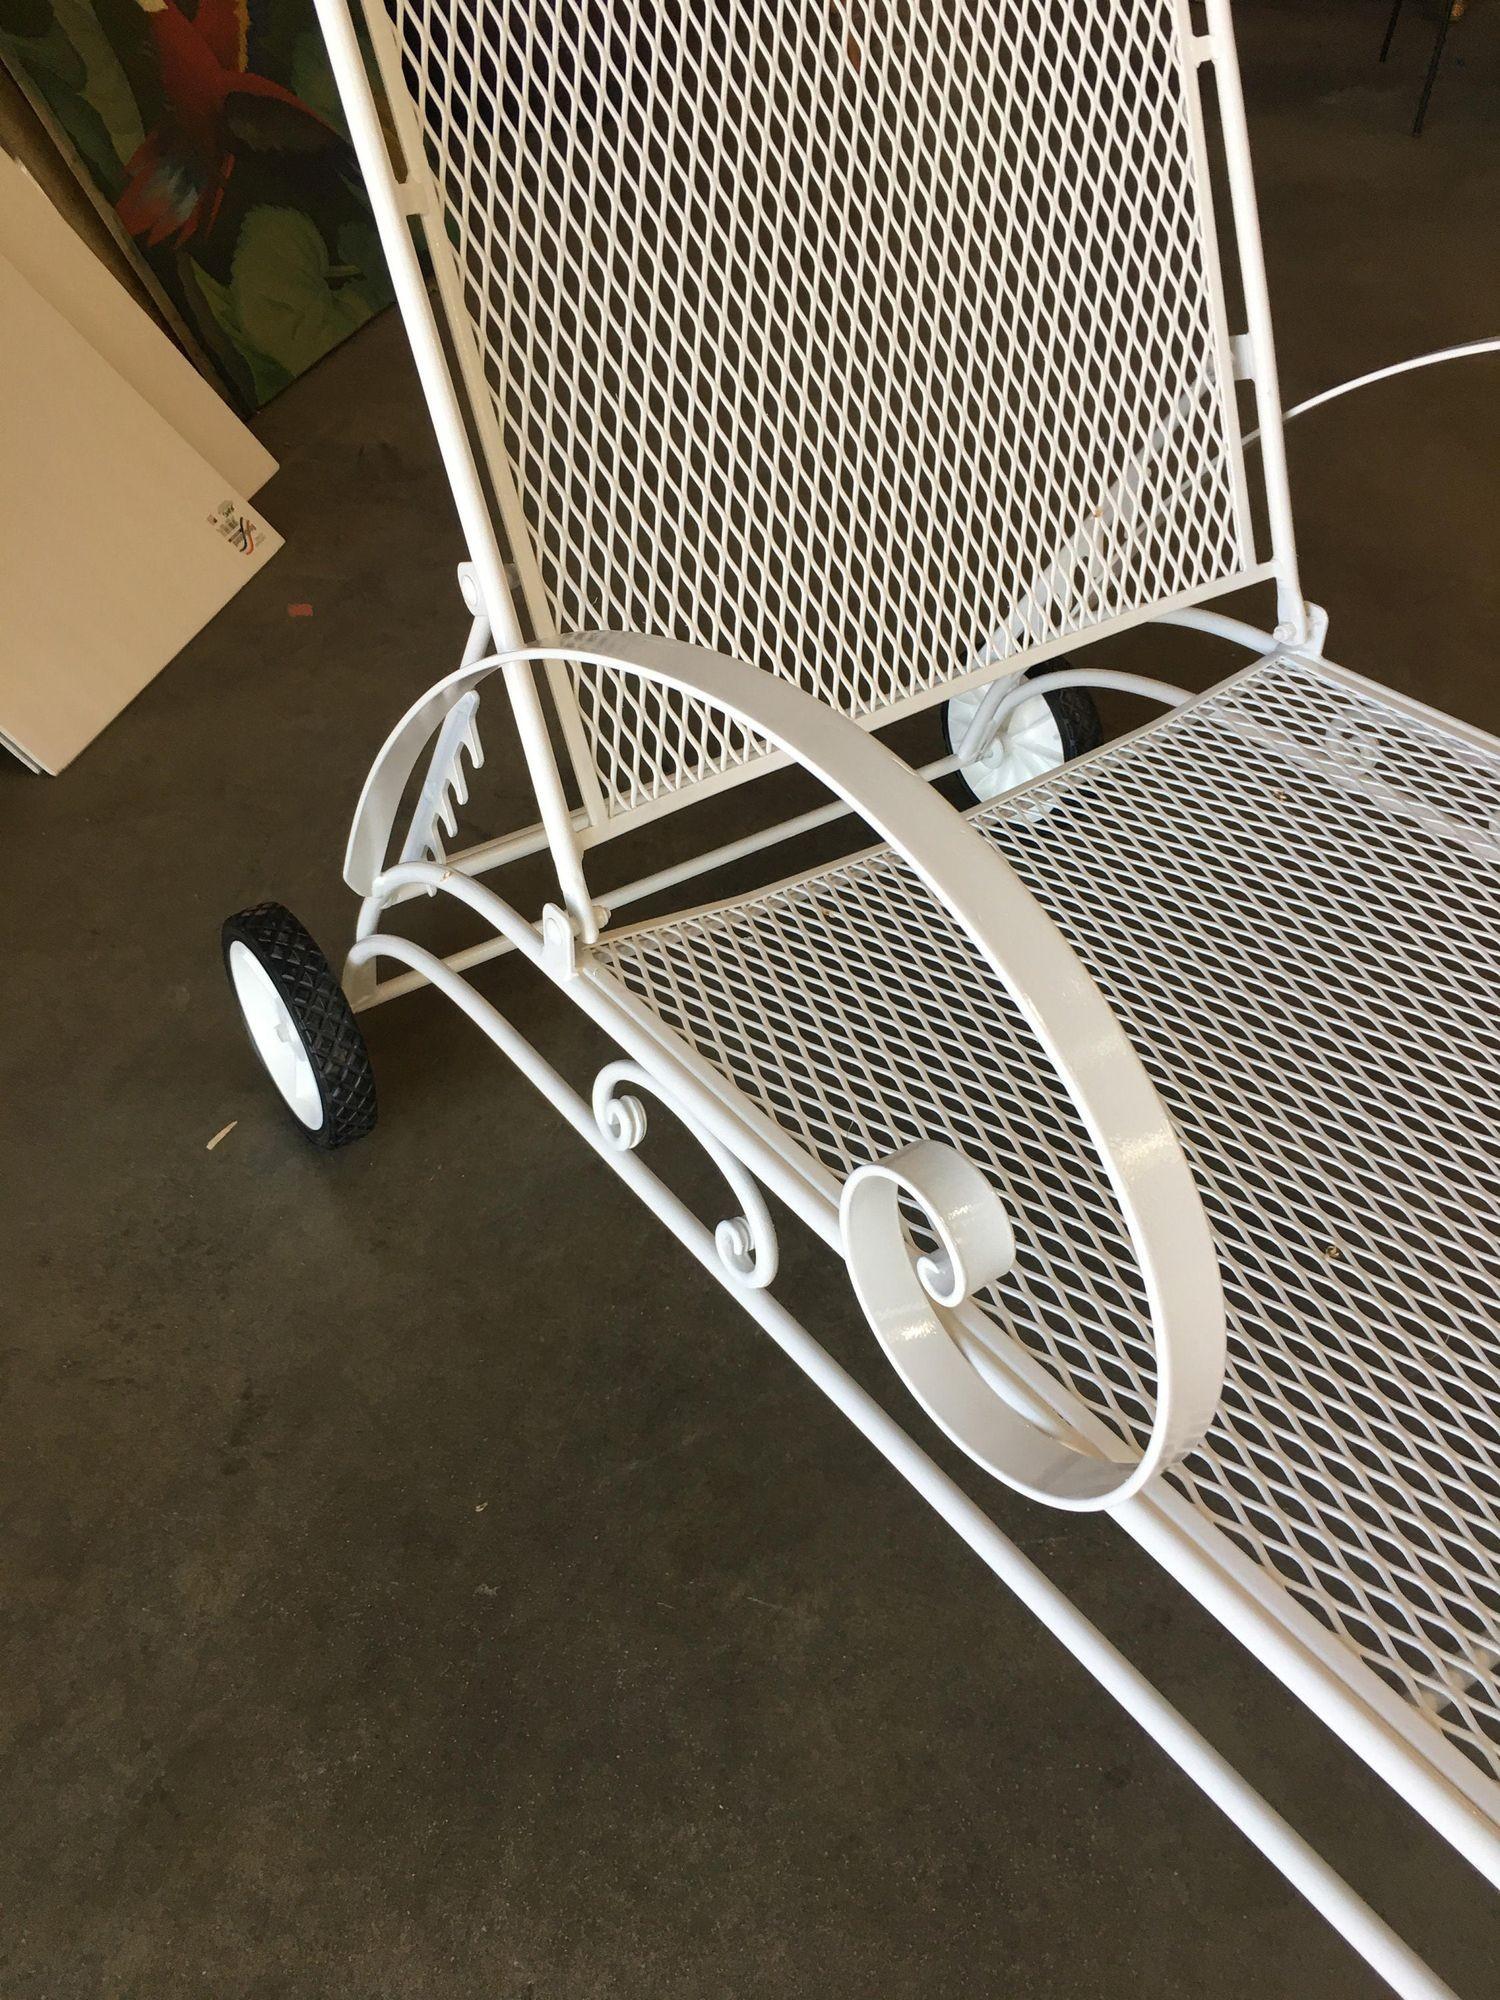 Iron Mesh Outdoor / Patio Chaise Lounge by Woodard In Excellent Condition For Sale In Van Nuys, CA